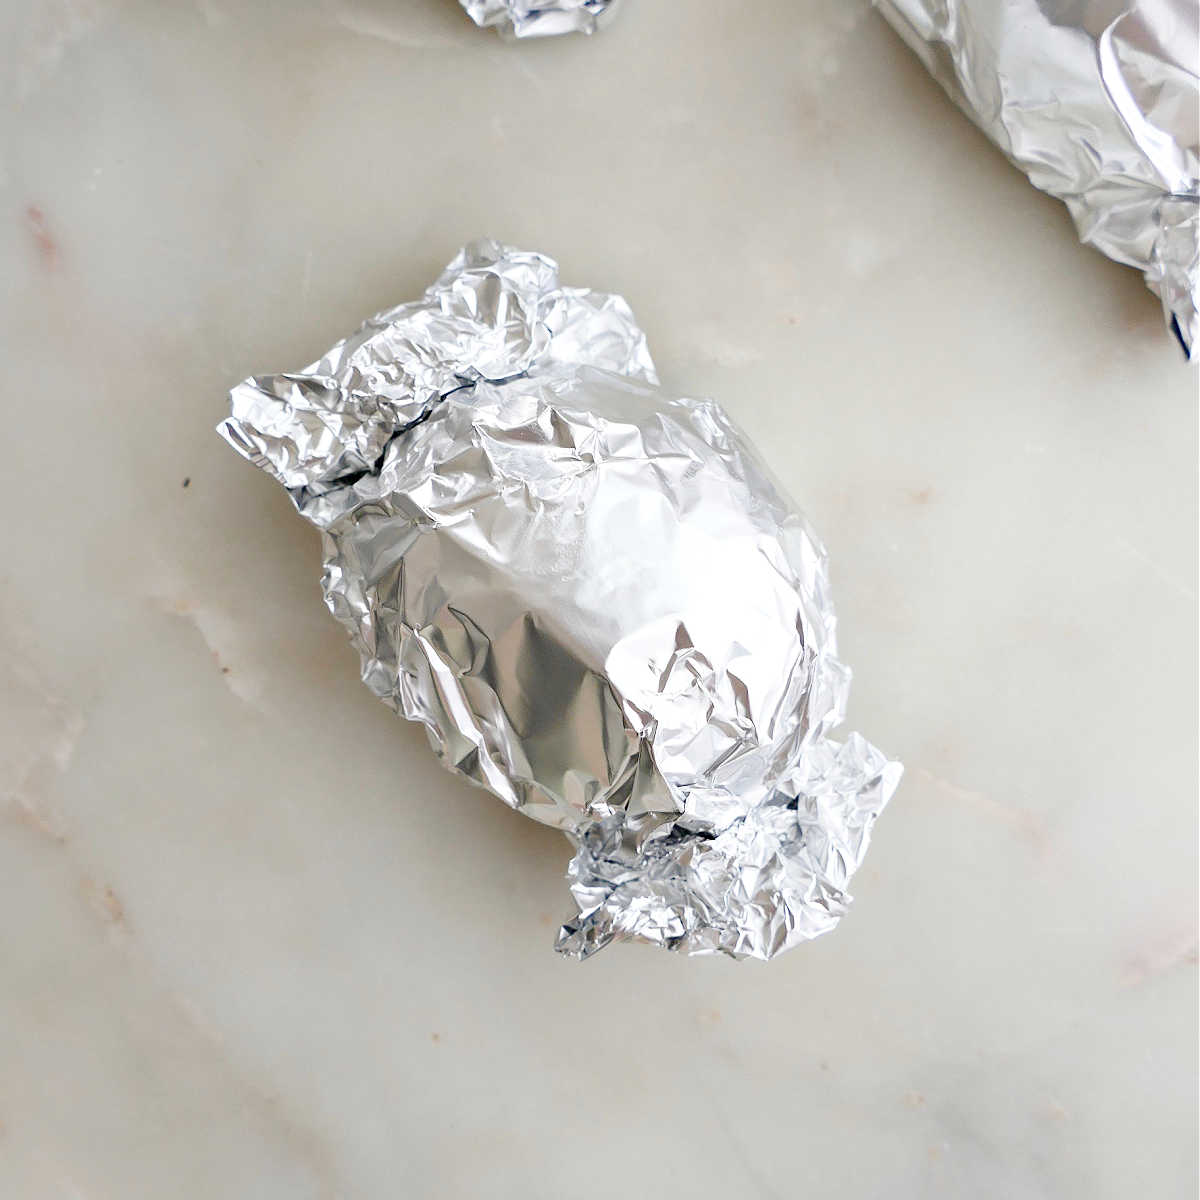 a beet wrapped in a foil packet before being roasted